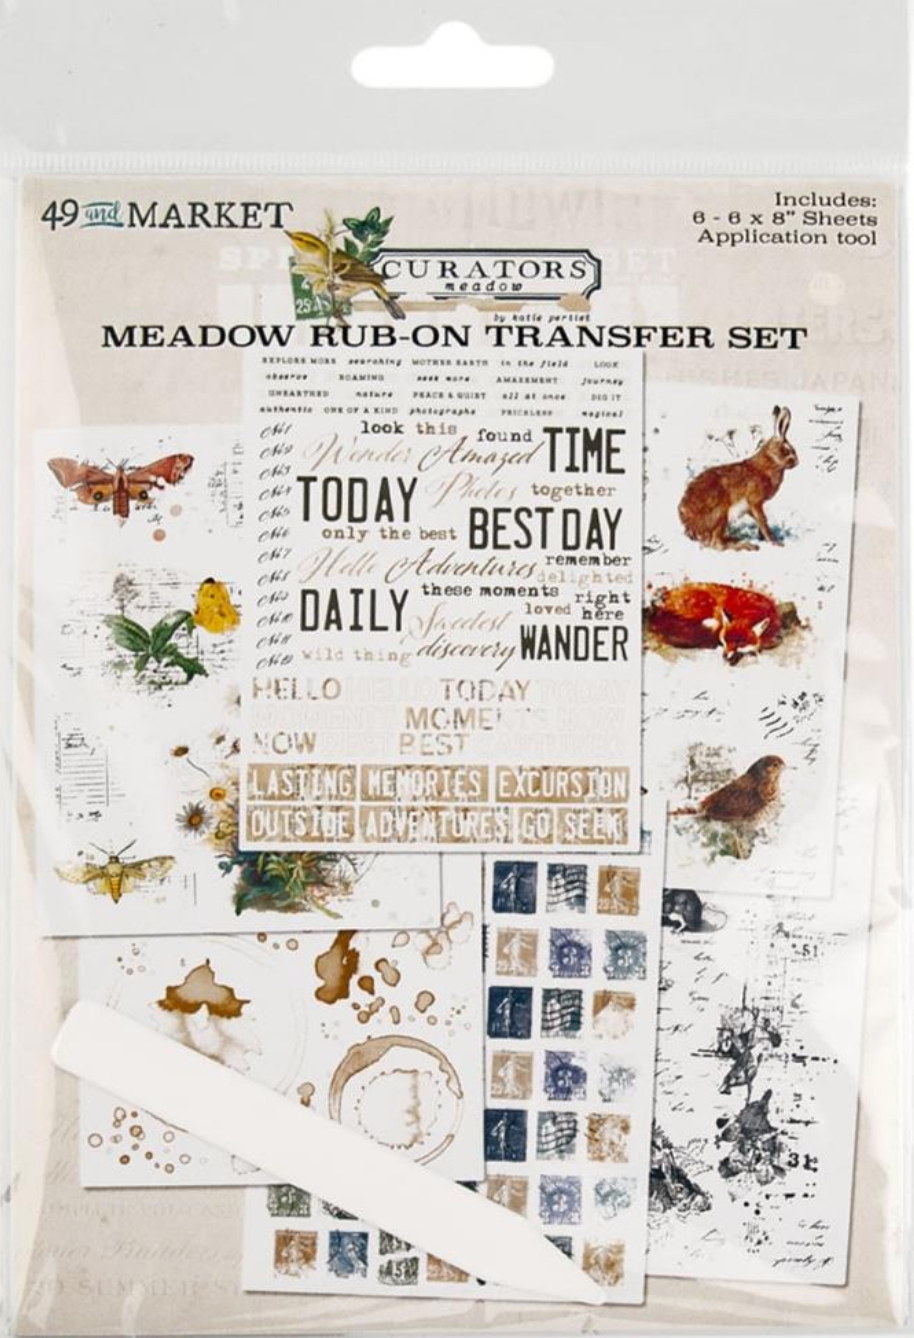 Rub-On Transfer Set - 6x8 Inch  - 6 Sheets - Curators Meadow - 49 And Market